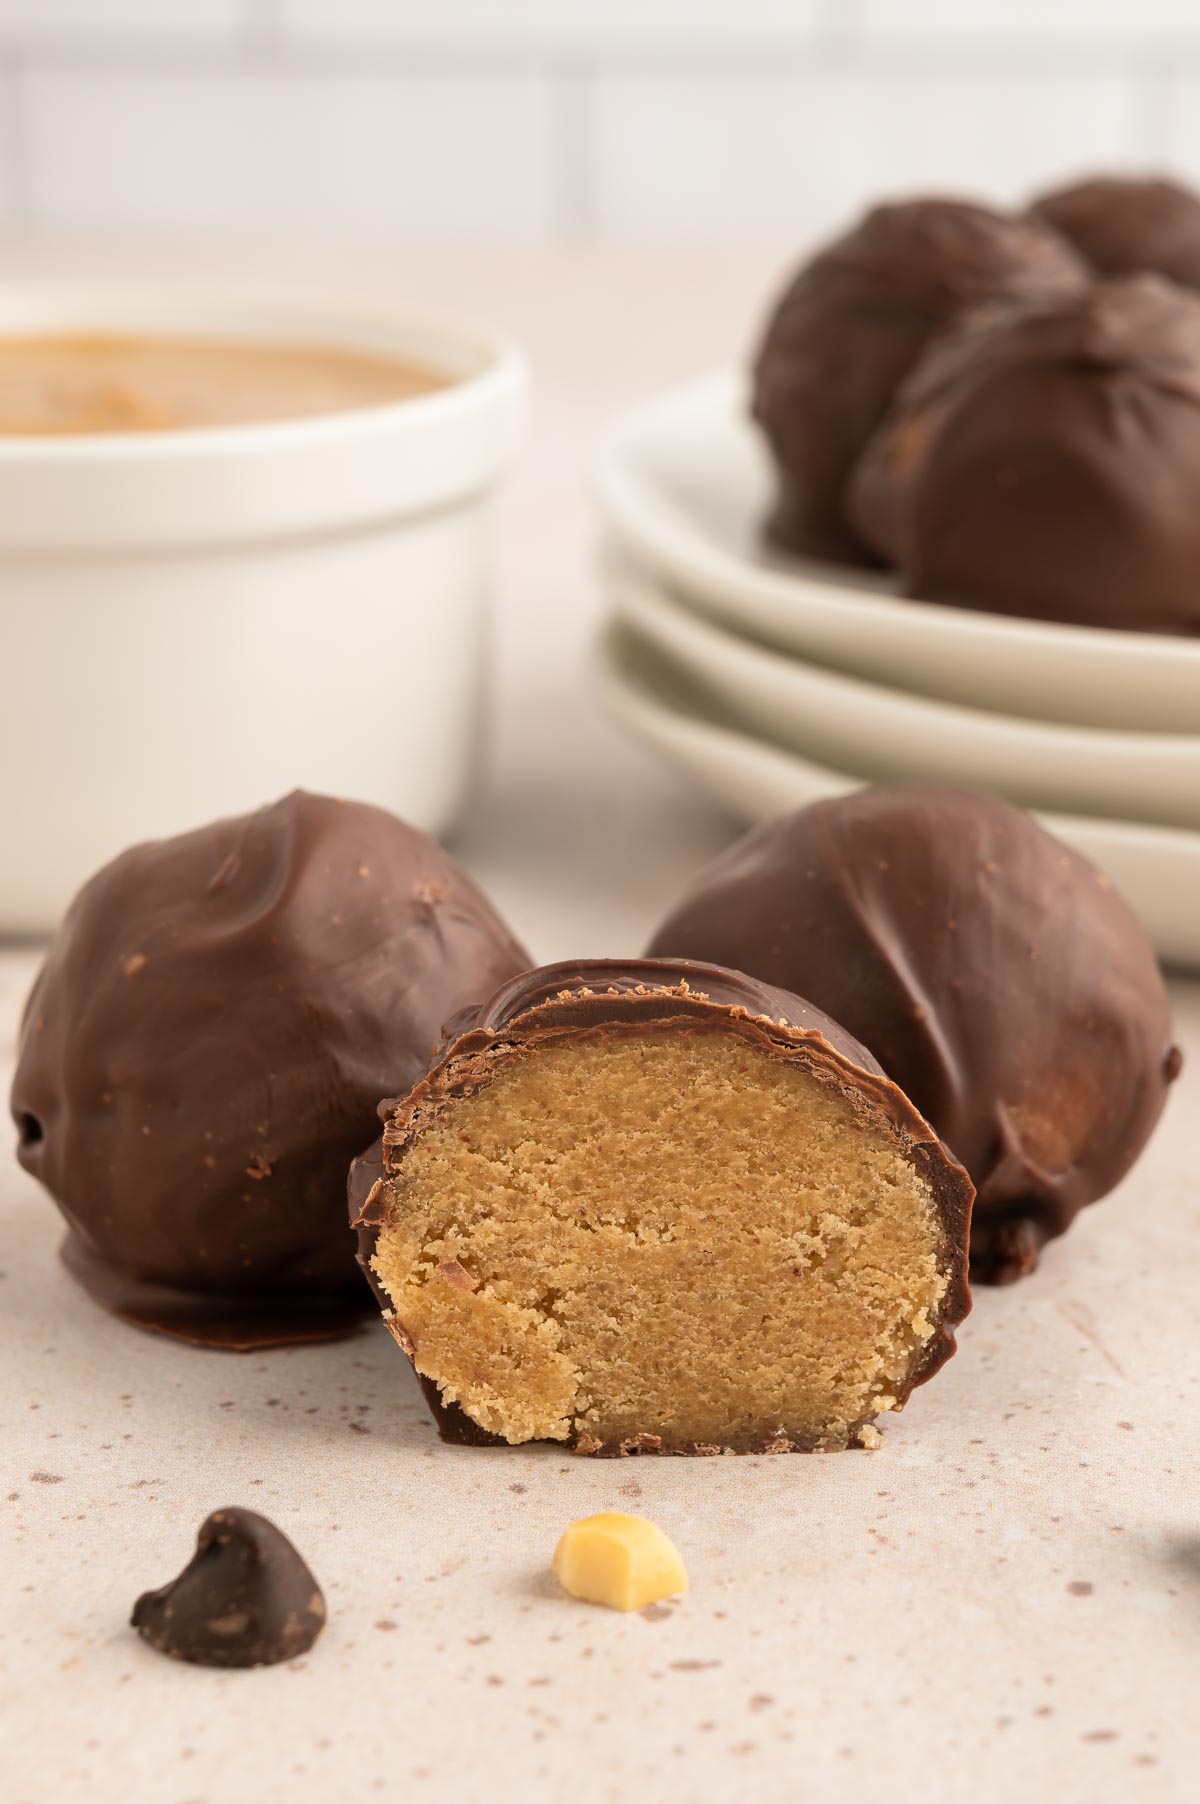 A chocolate-covered cookie dough ball, cut in half.